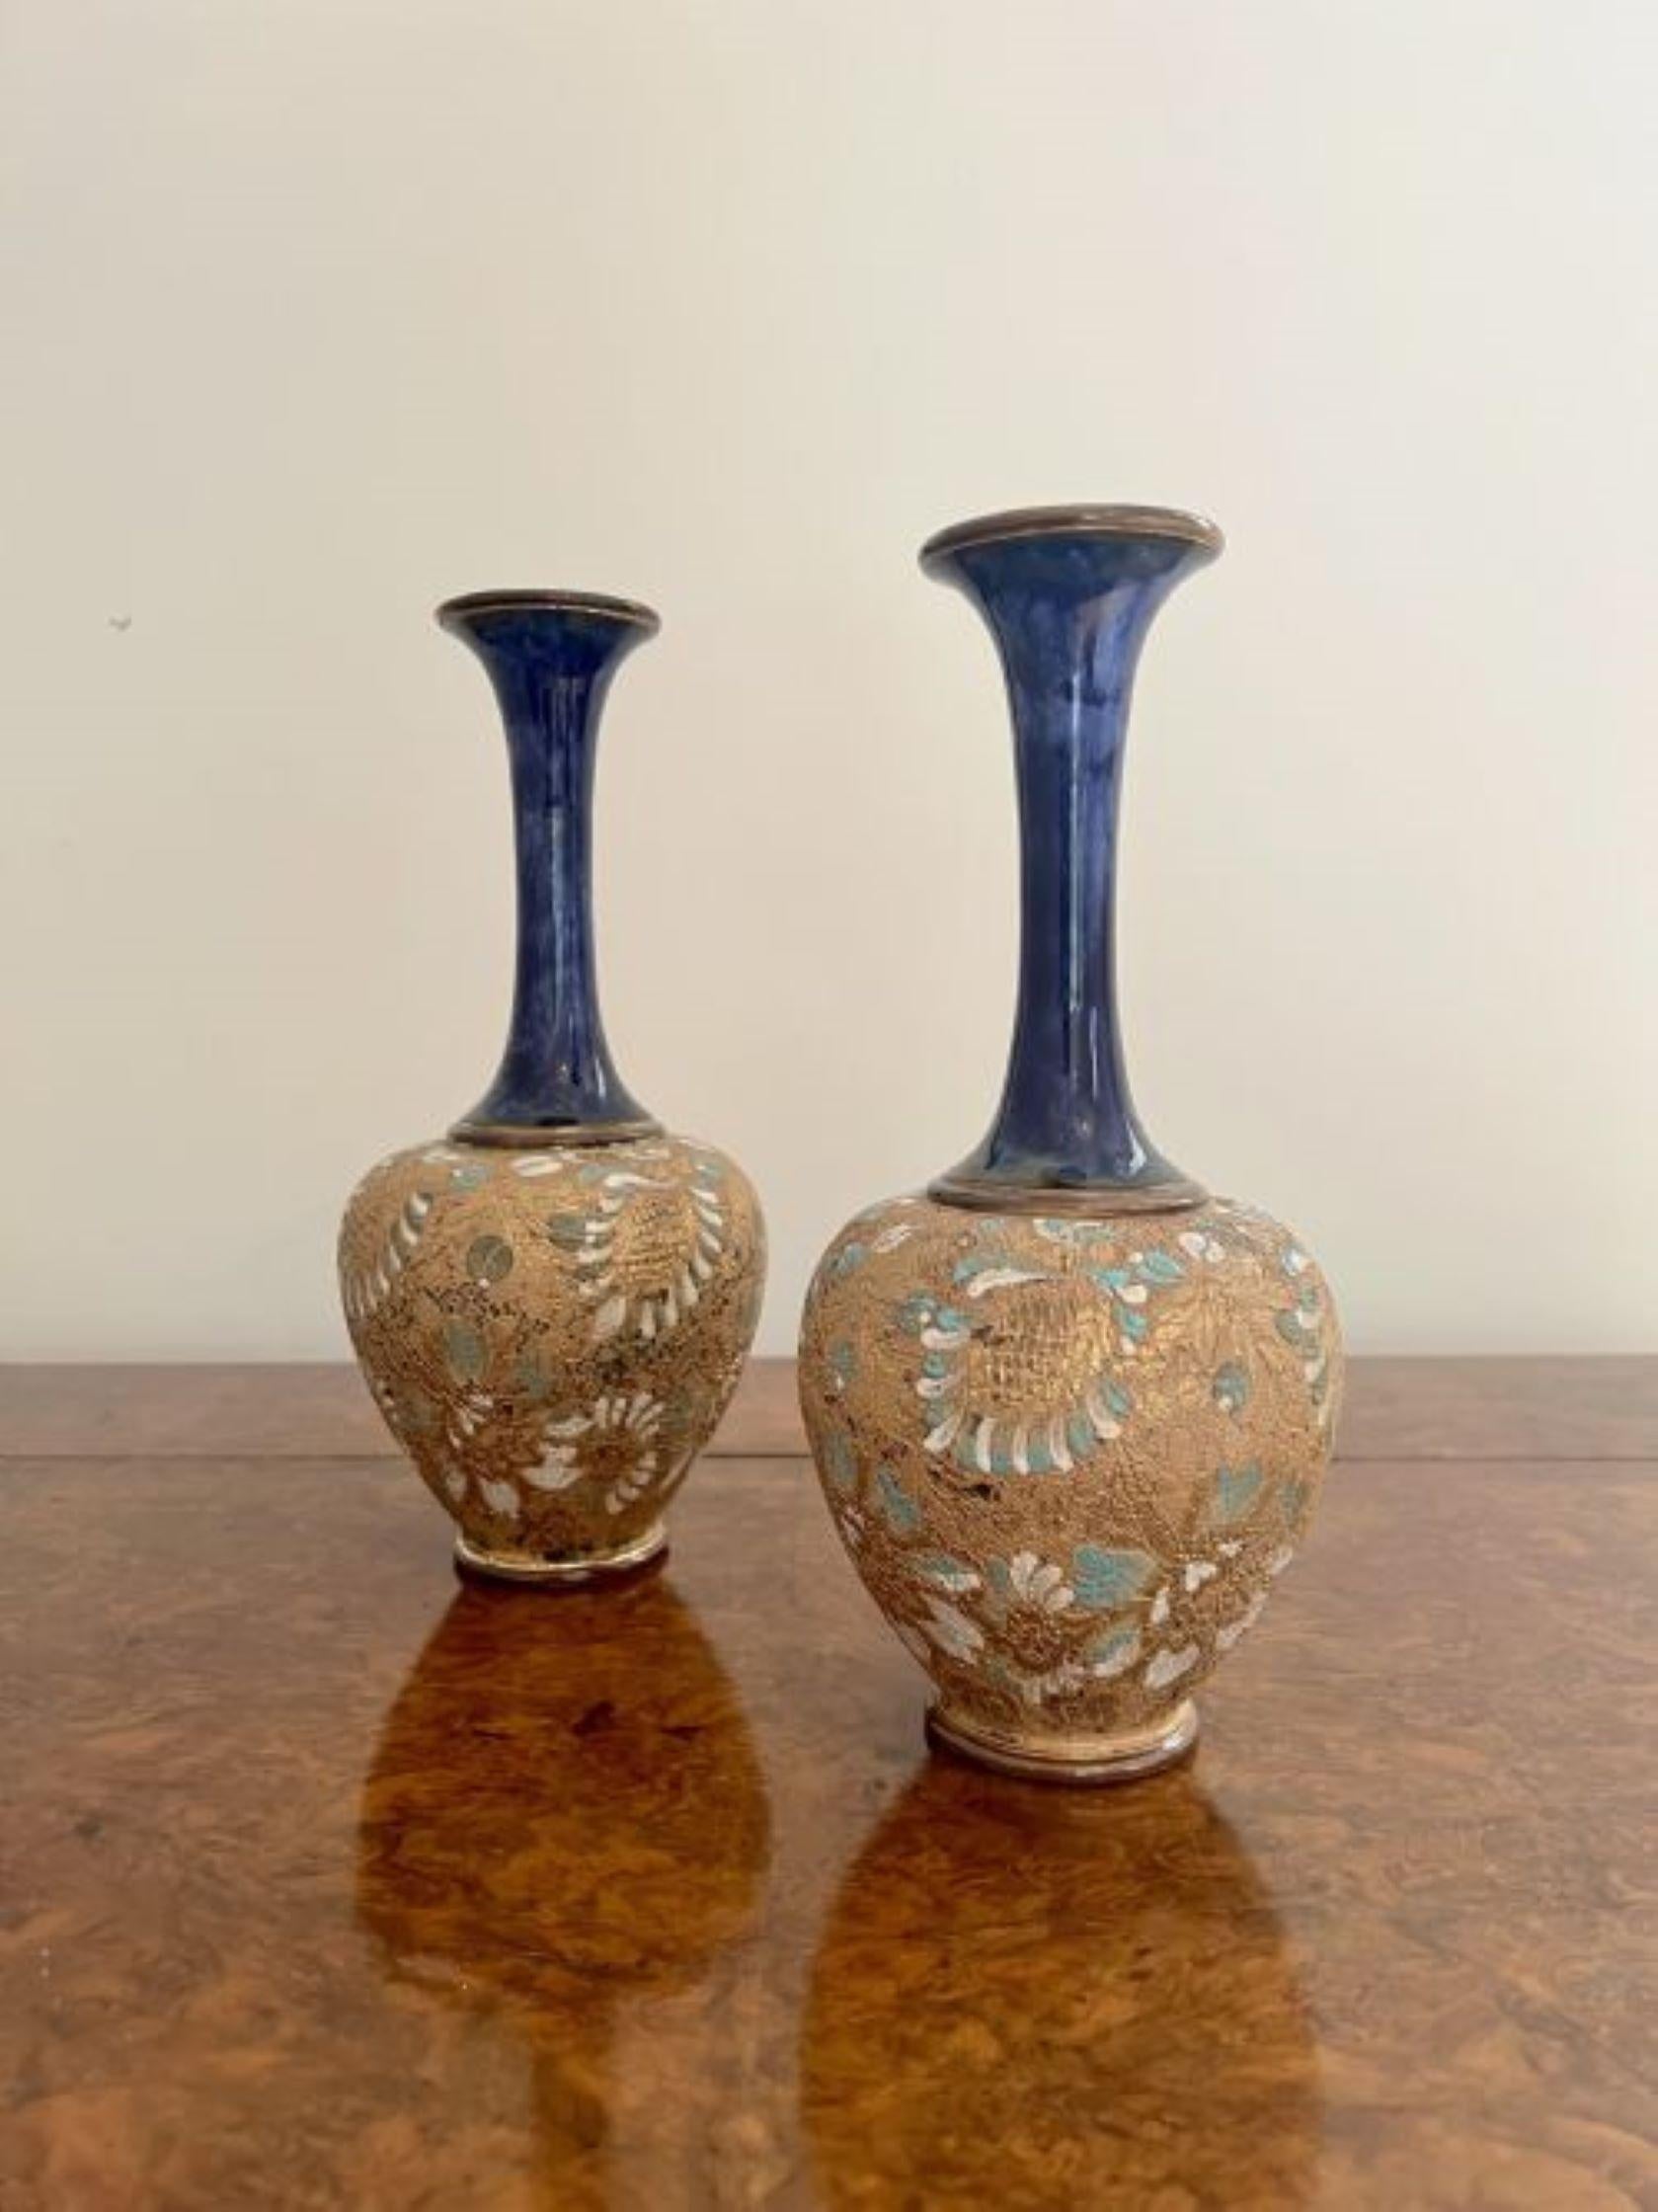 Lovely pair of quality antique Doulton vases having a lovely pair of shaped antique Royal Doulton vases having a band of green, blue and white flowers on a golden background to the centre of the vase and a dark blue glaze to the rest of the vase.